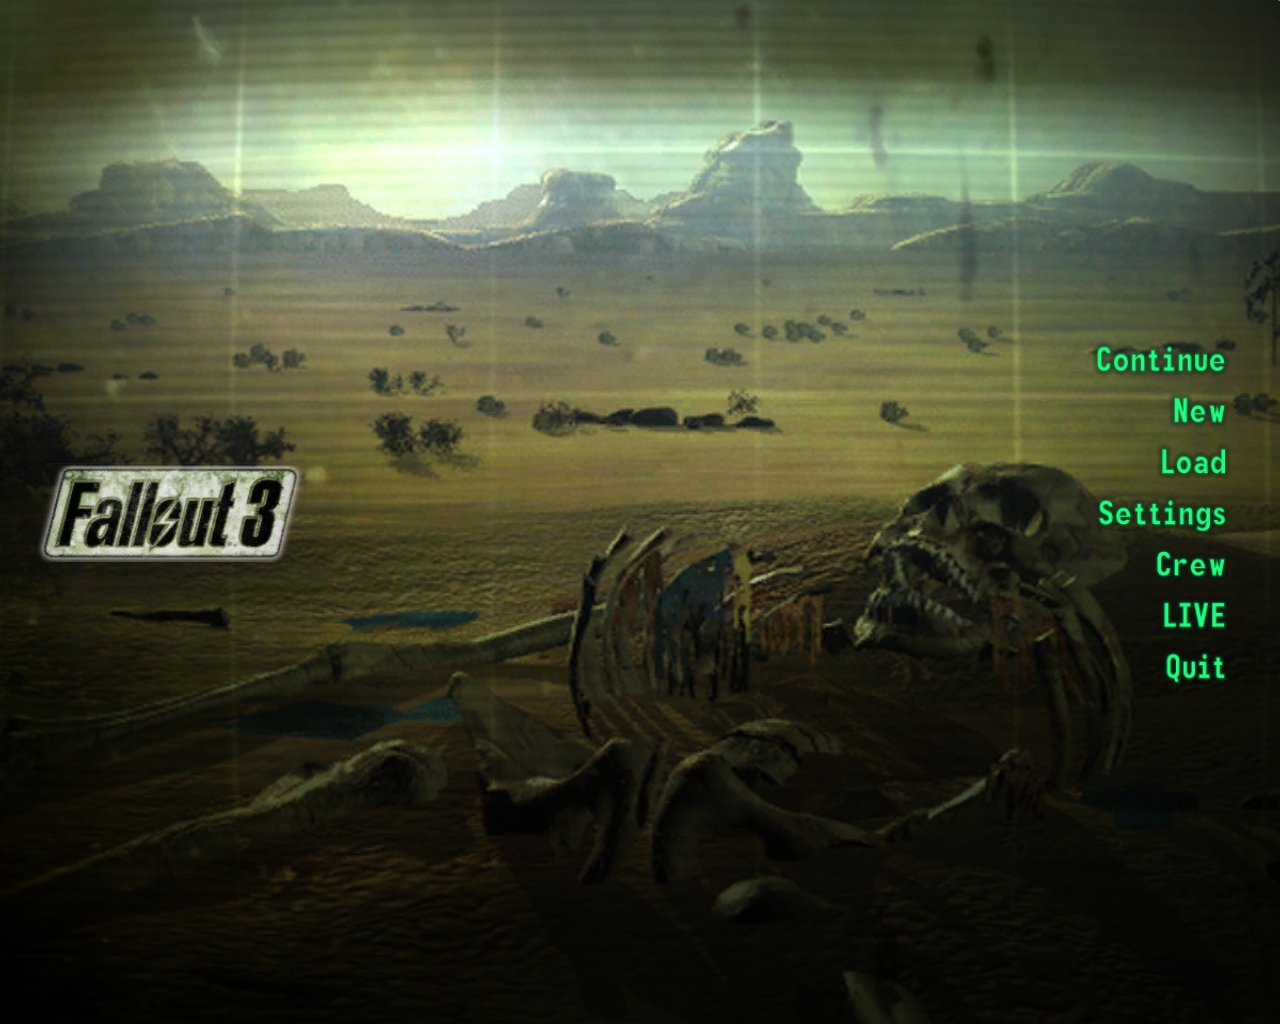 Fallout 3 latest patch and crack